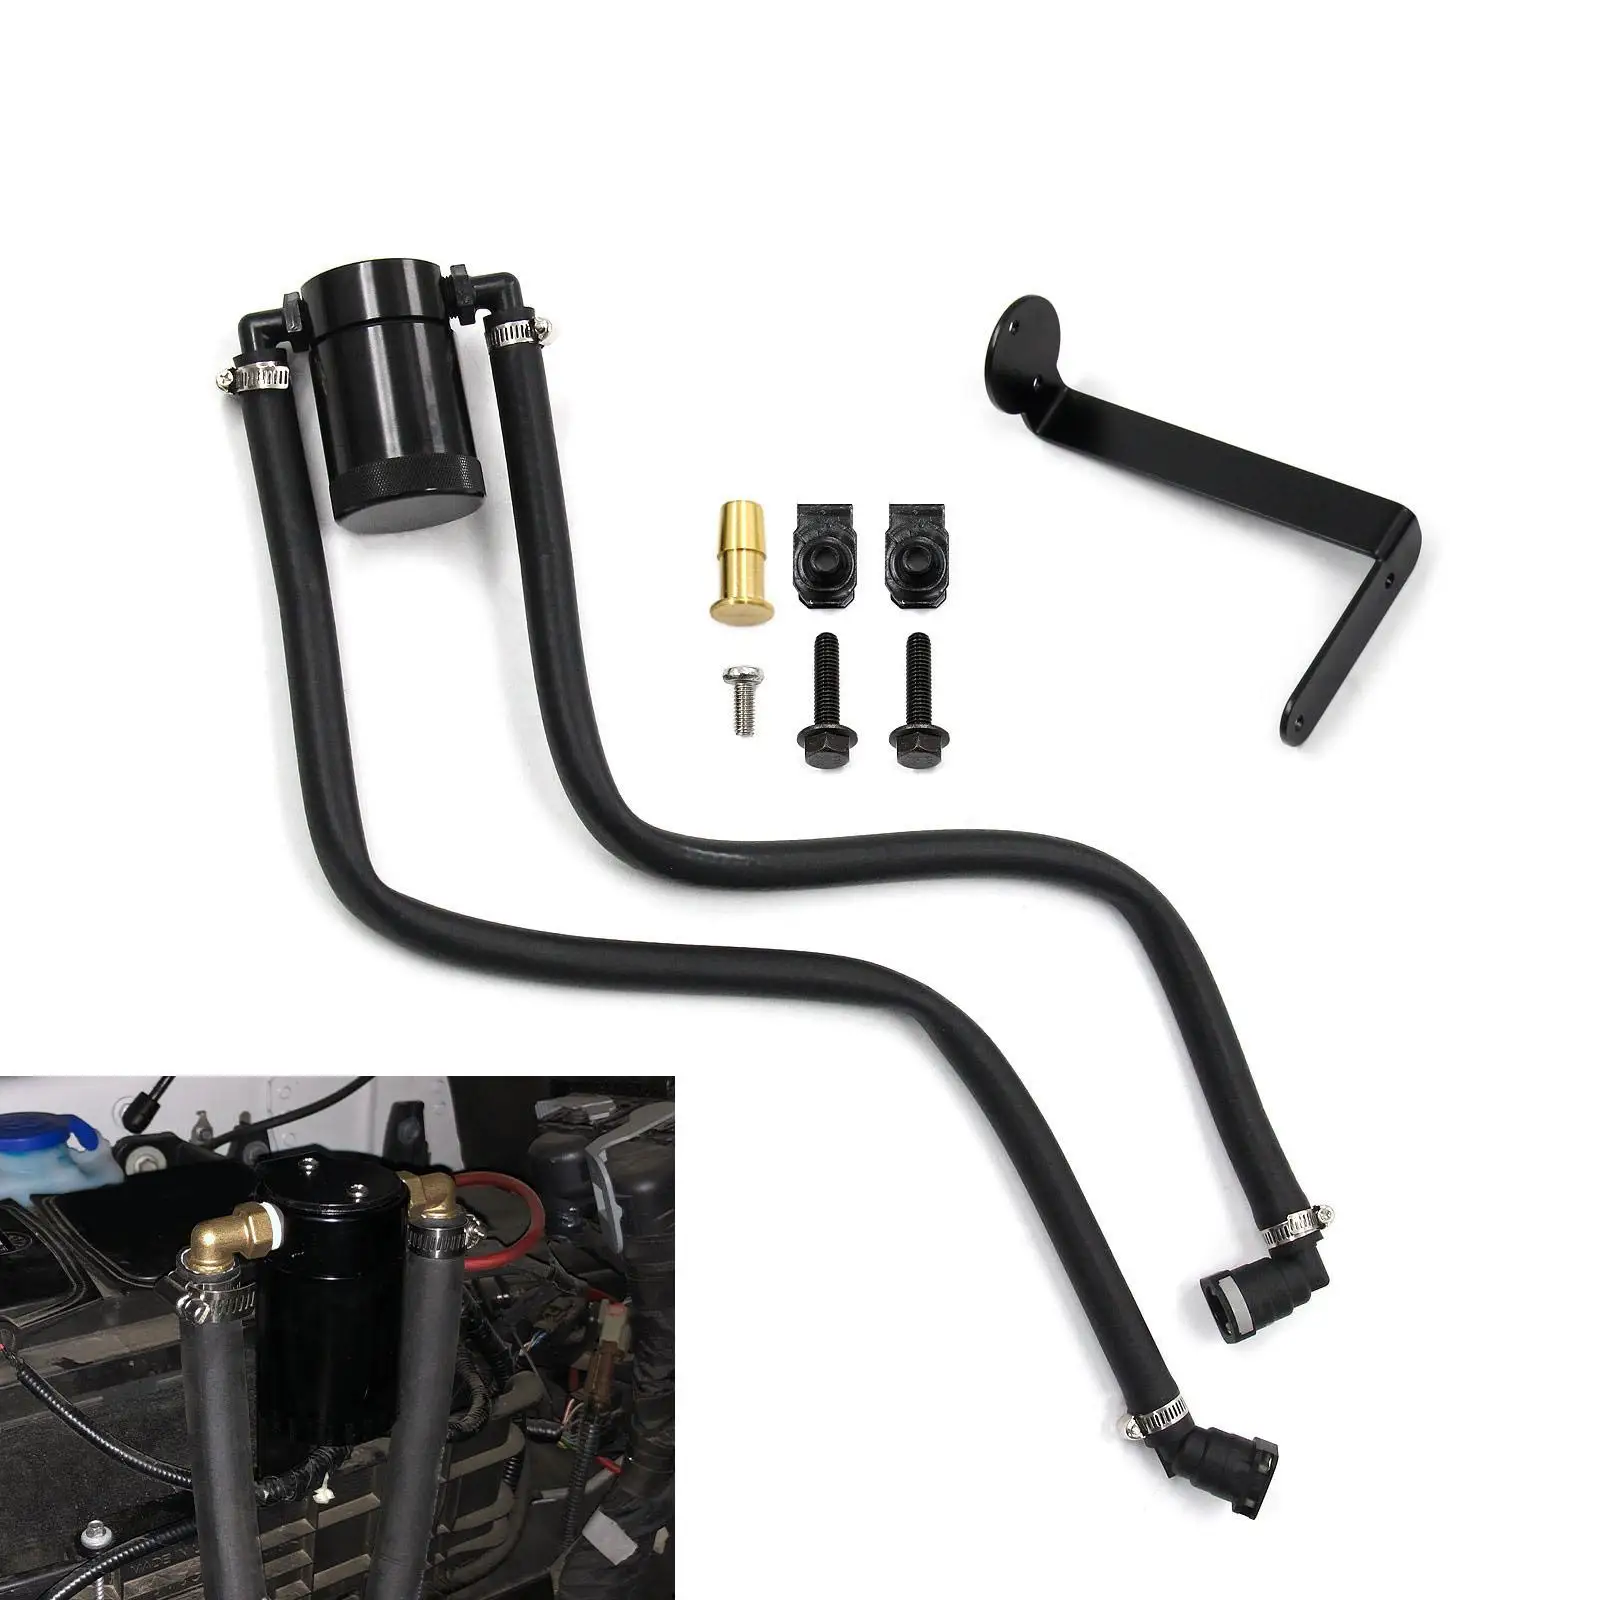 Passenger Side Oil Separator Replacement for Ford F-150 5.0L 2.7L 3.5L Expedition 3.5L Ecoboost Car Accessories